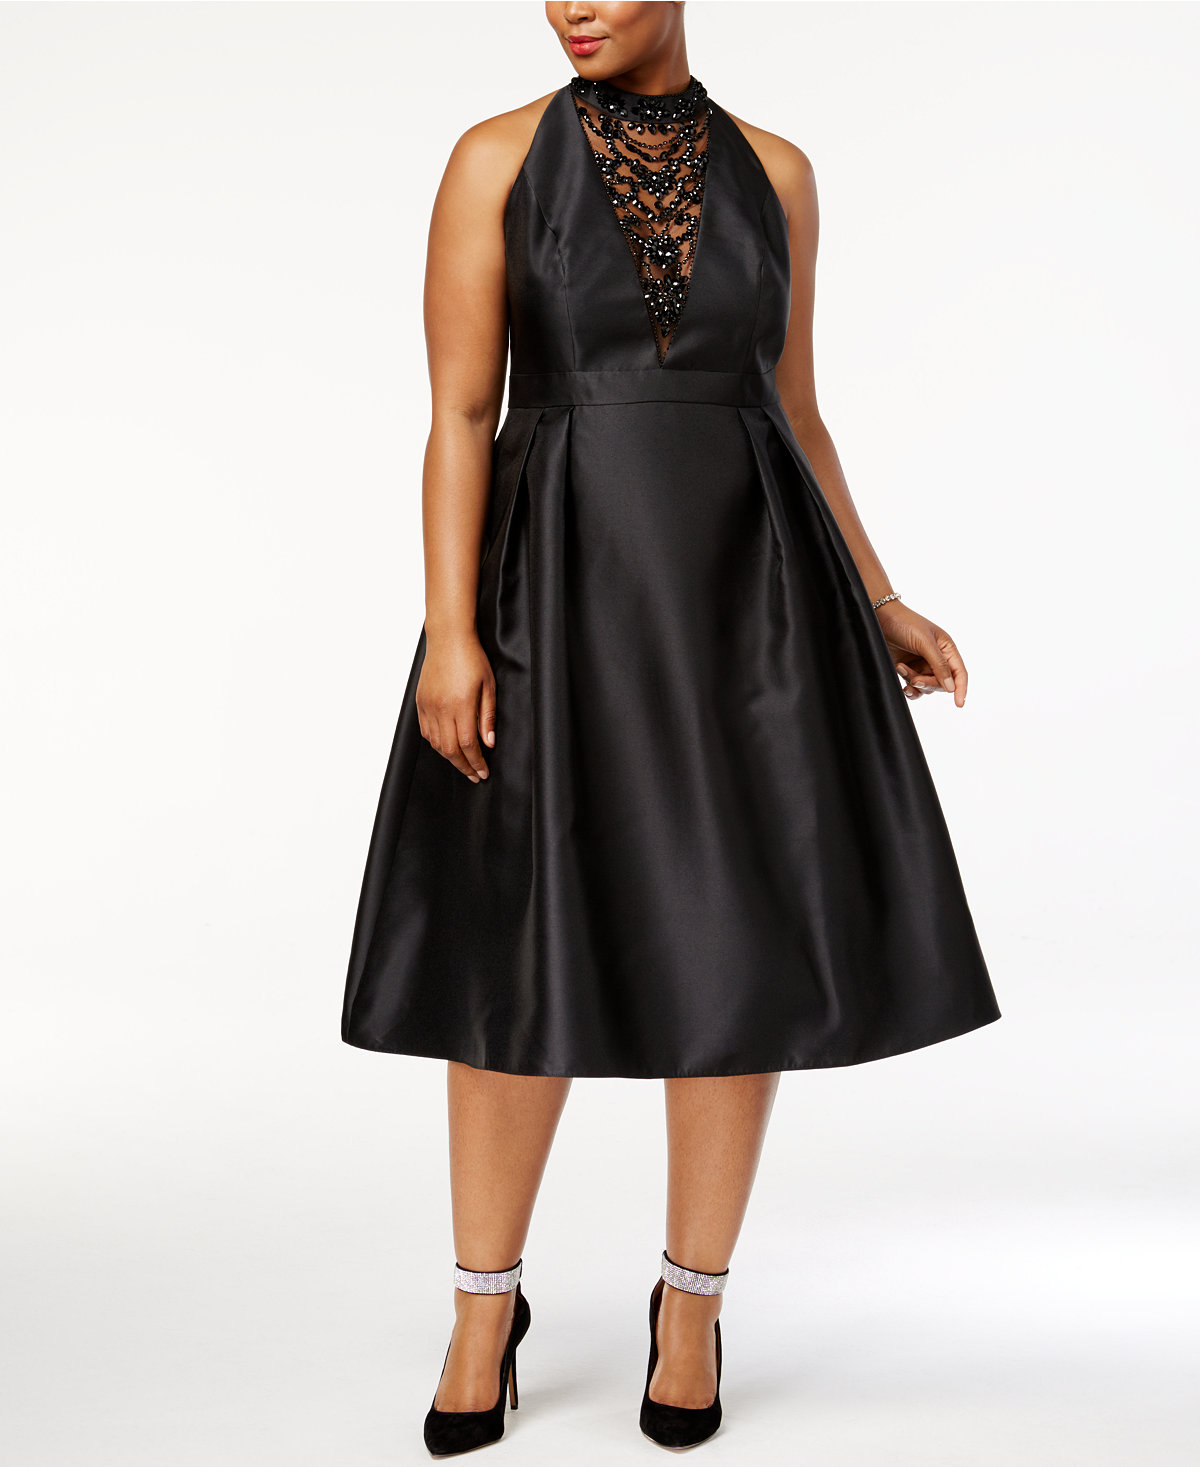 https://www.macys.com/shop/product/adrianna-papell-plus-size-embellished-fit-flare-dress?ID=5092890&CategoryID=37038#fn=sp%3D6%26spc%3D1100%26ruleId%3D87%7CBOOST%20SAVED%20SET%7CBOOST%20ATTRIBUTE%26searchPass%3DmatchNone%26slotId%3D21